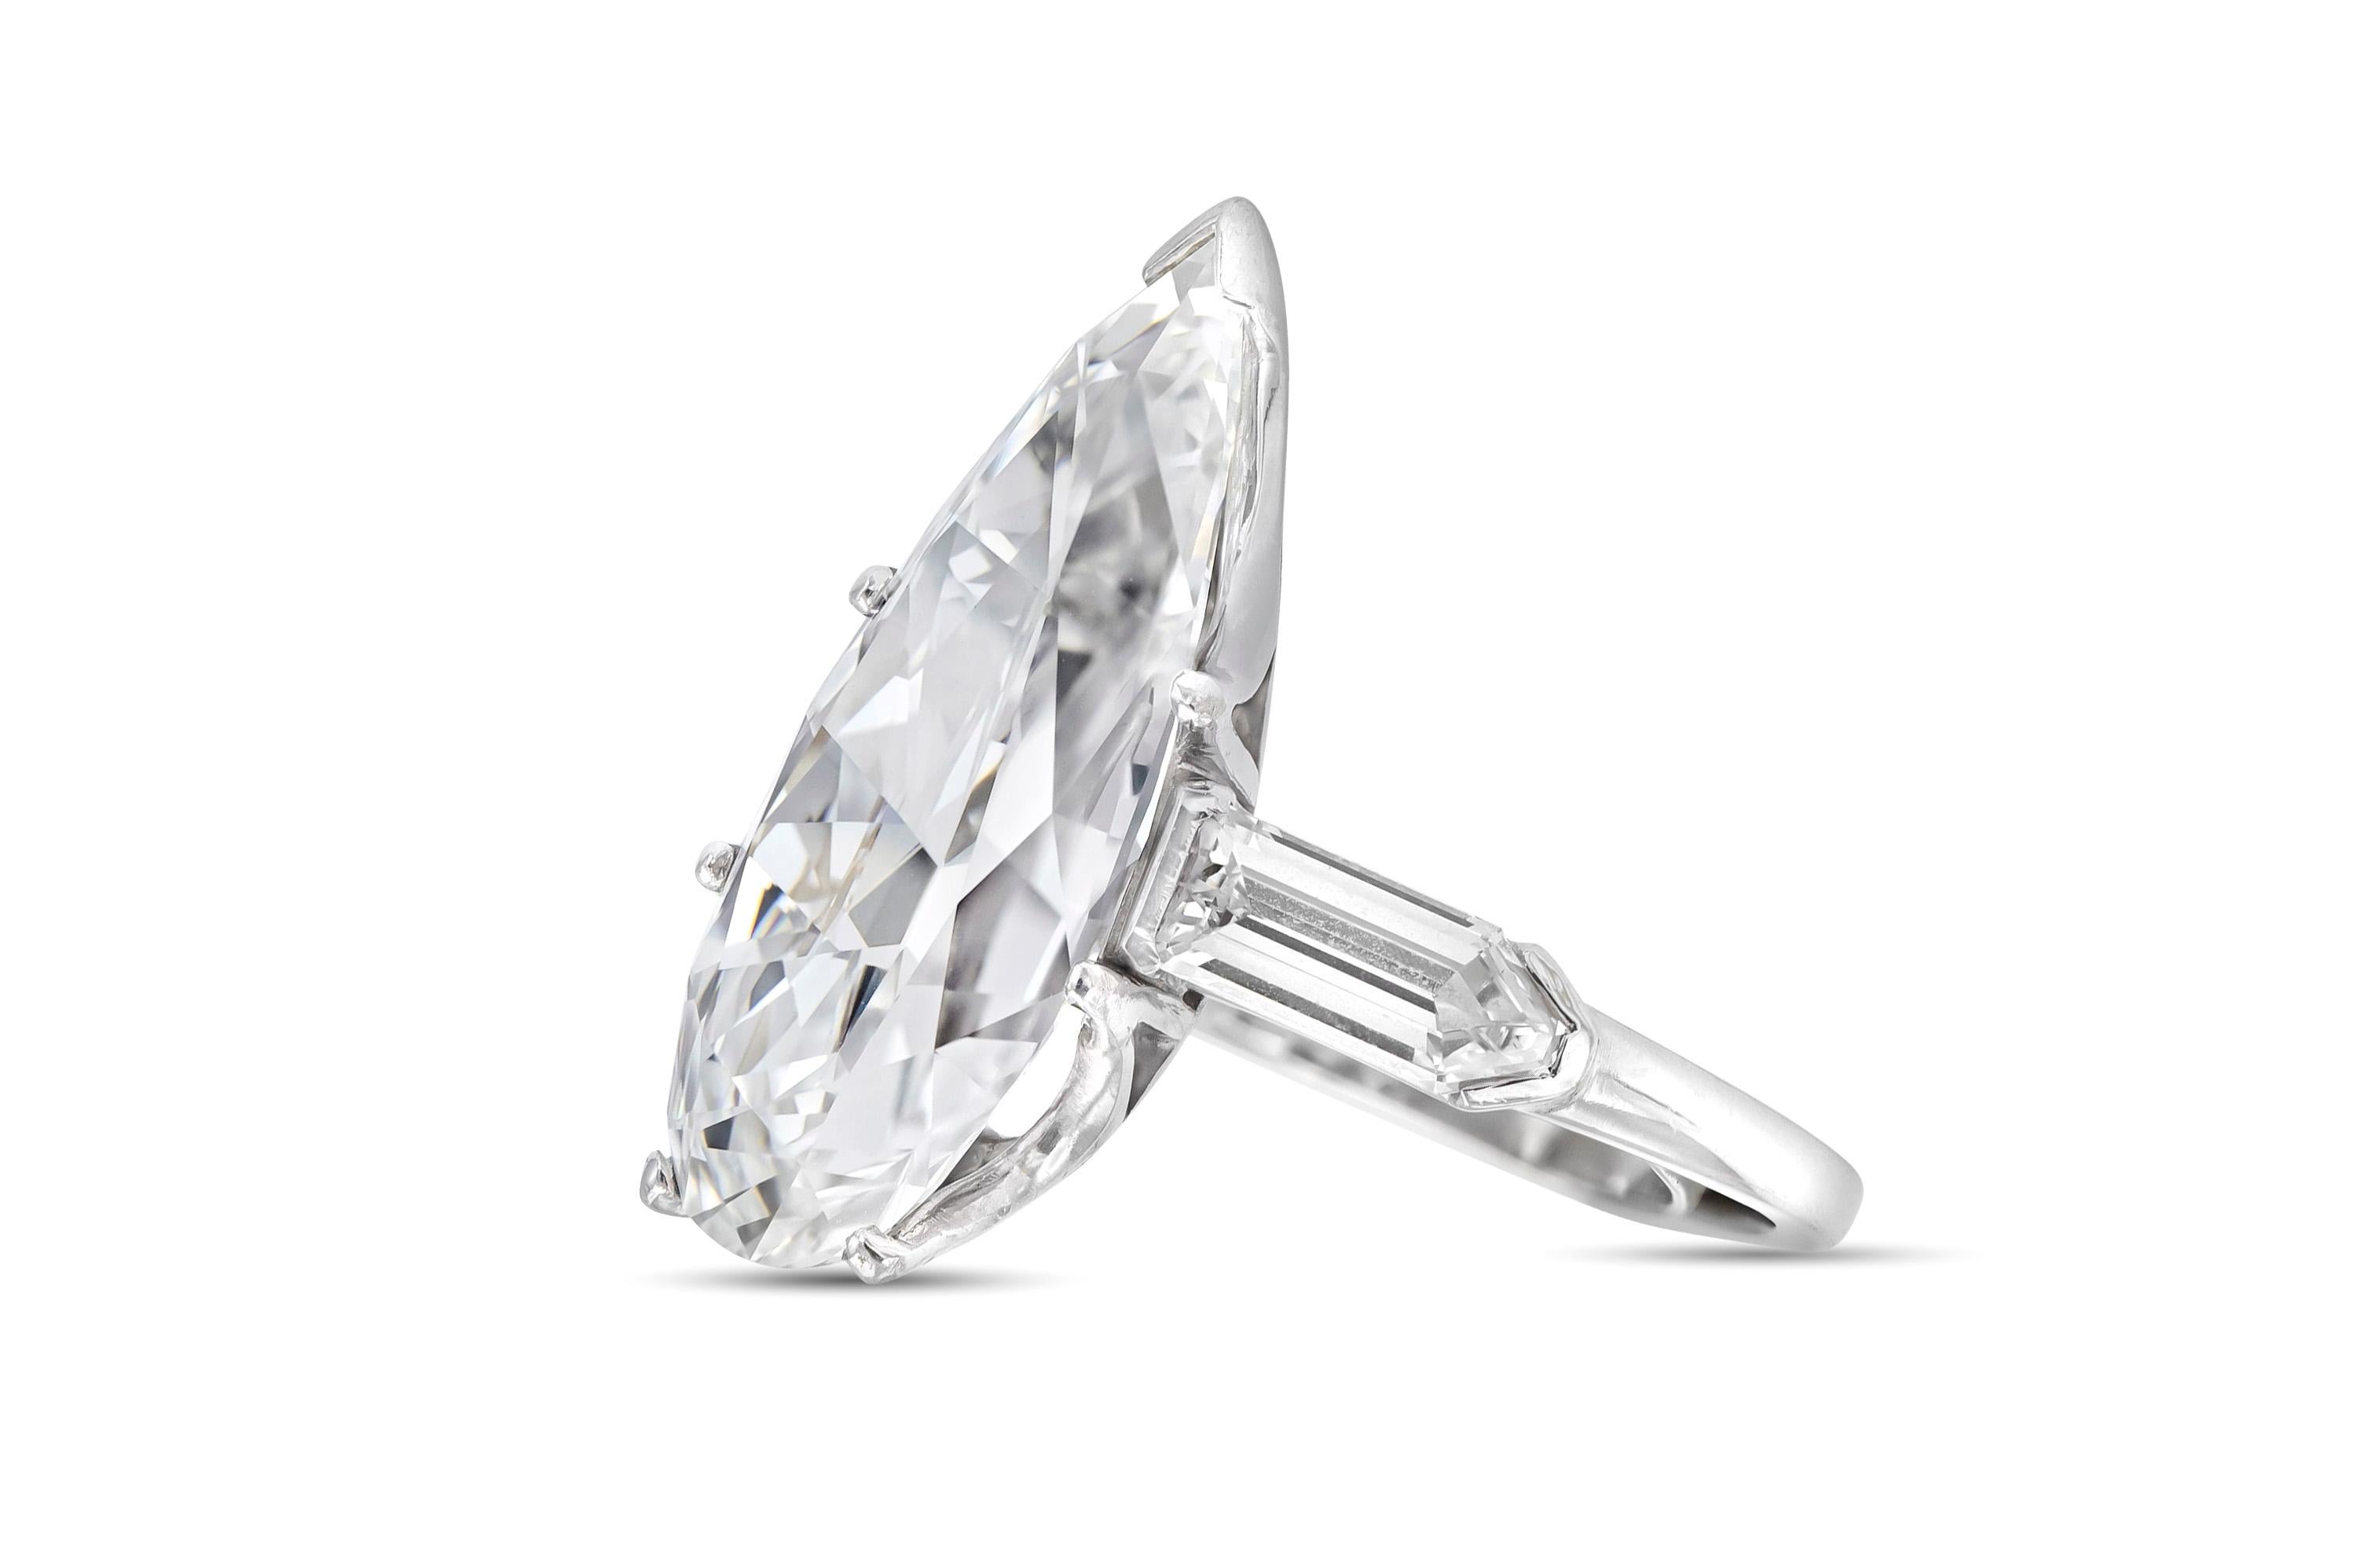 Finely crafted in platinum with a GIA certified Pear Shaped diamond weighing 10.67 carats.
G color, VS1 clarity
GIA #1226180588
The ring features shield-cut diamonds on each side.